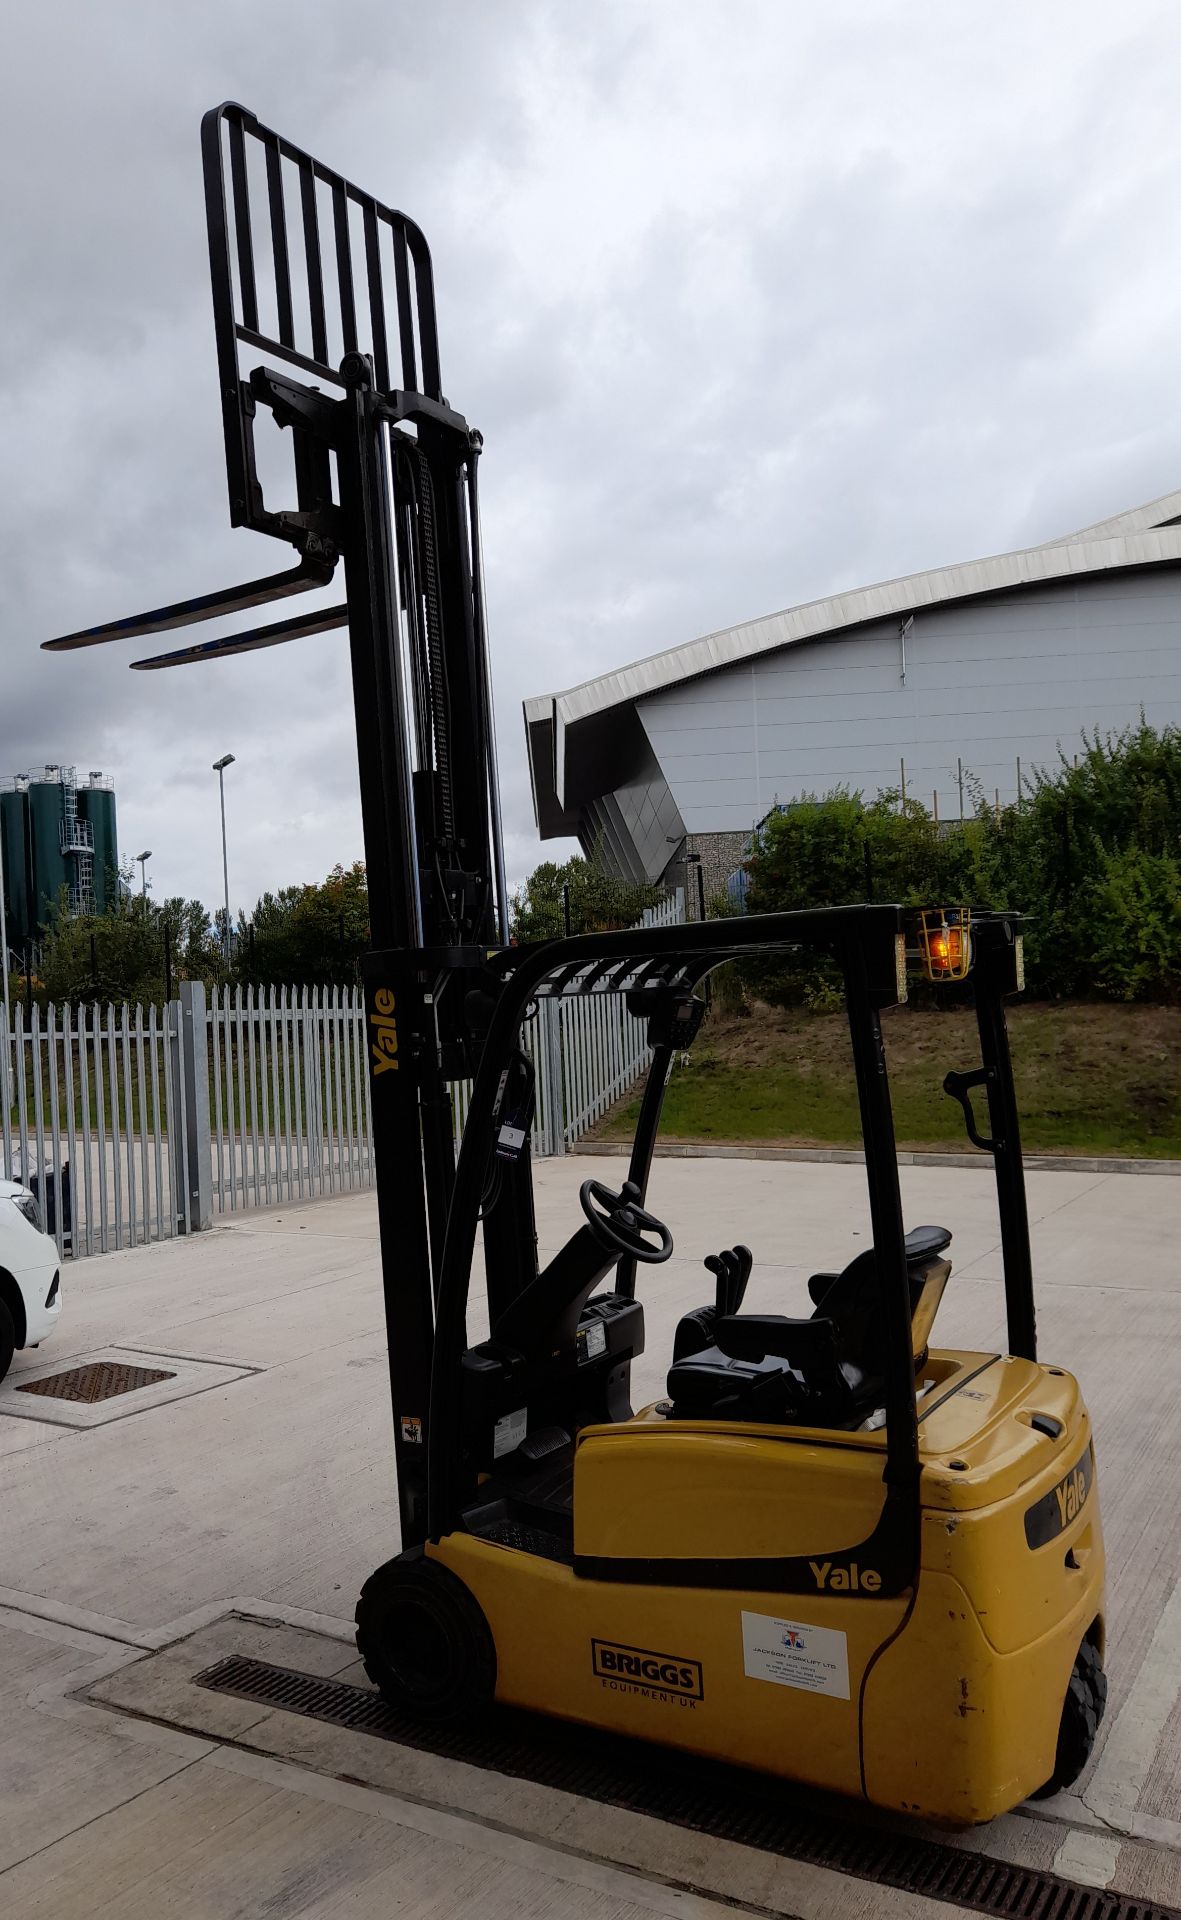 Yale ERP18VT MWBF2080 1.8tonne capacity Electric Forklift Truck, serial number G807B02410H (2010), - Image 11 of 17